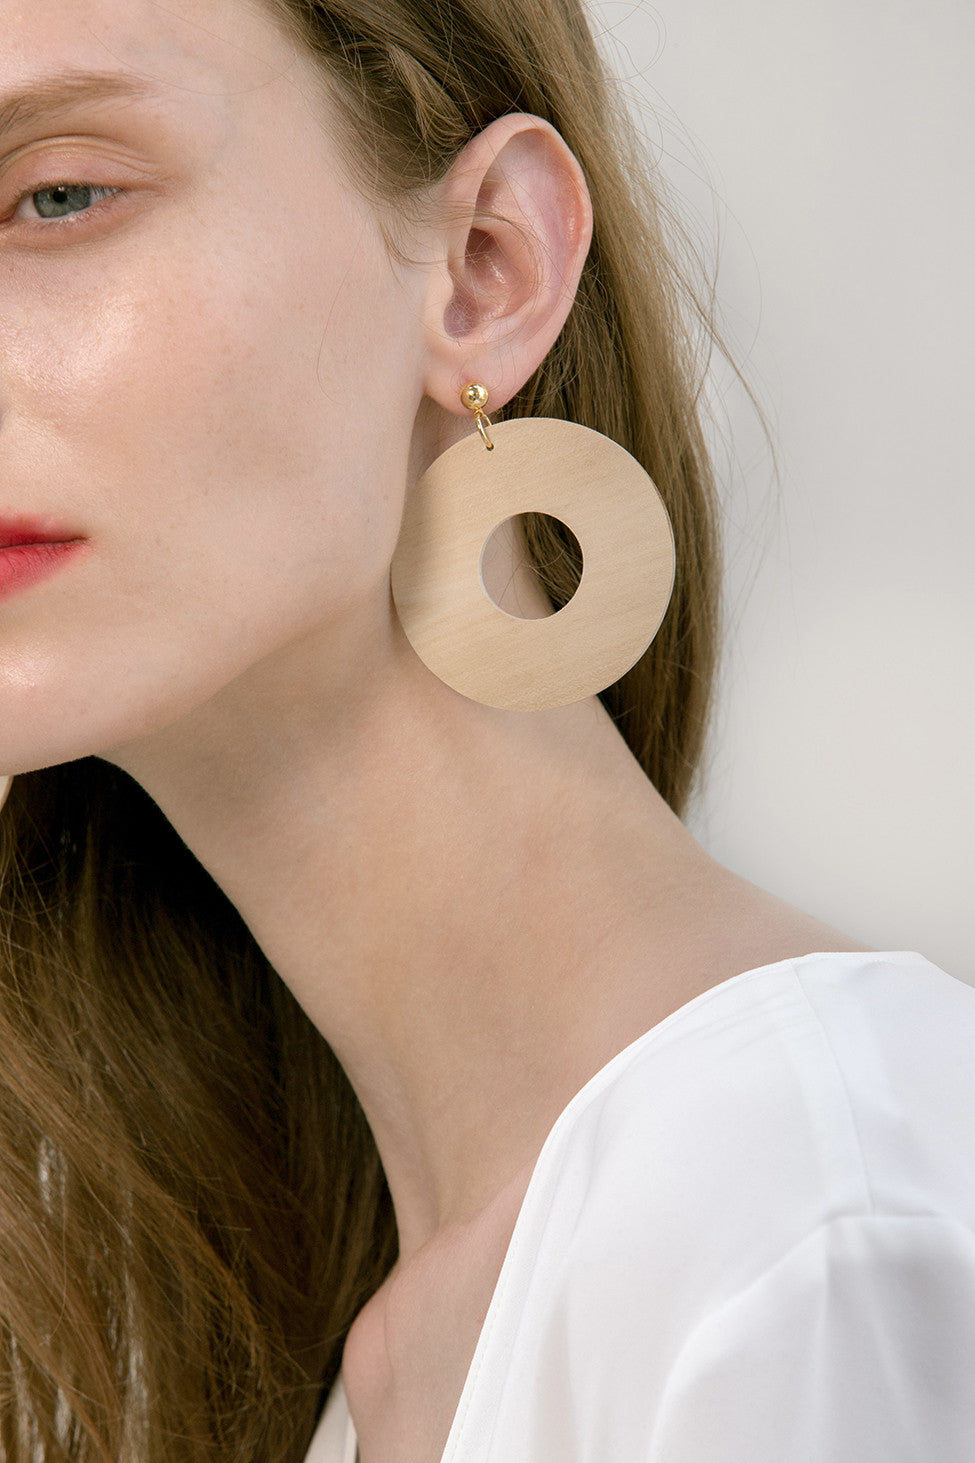 The Taza, a pair of round bamboo earrings. Gold metal post back. Sold as a set.